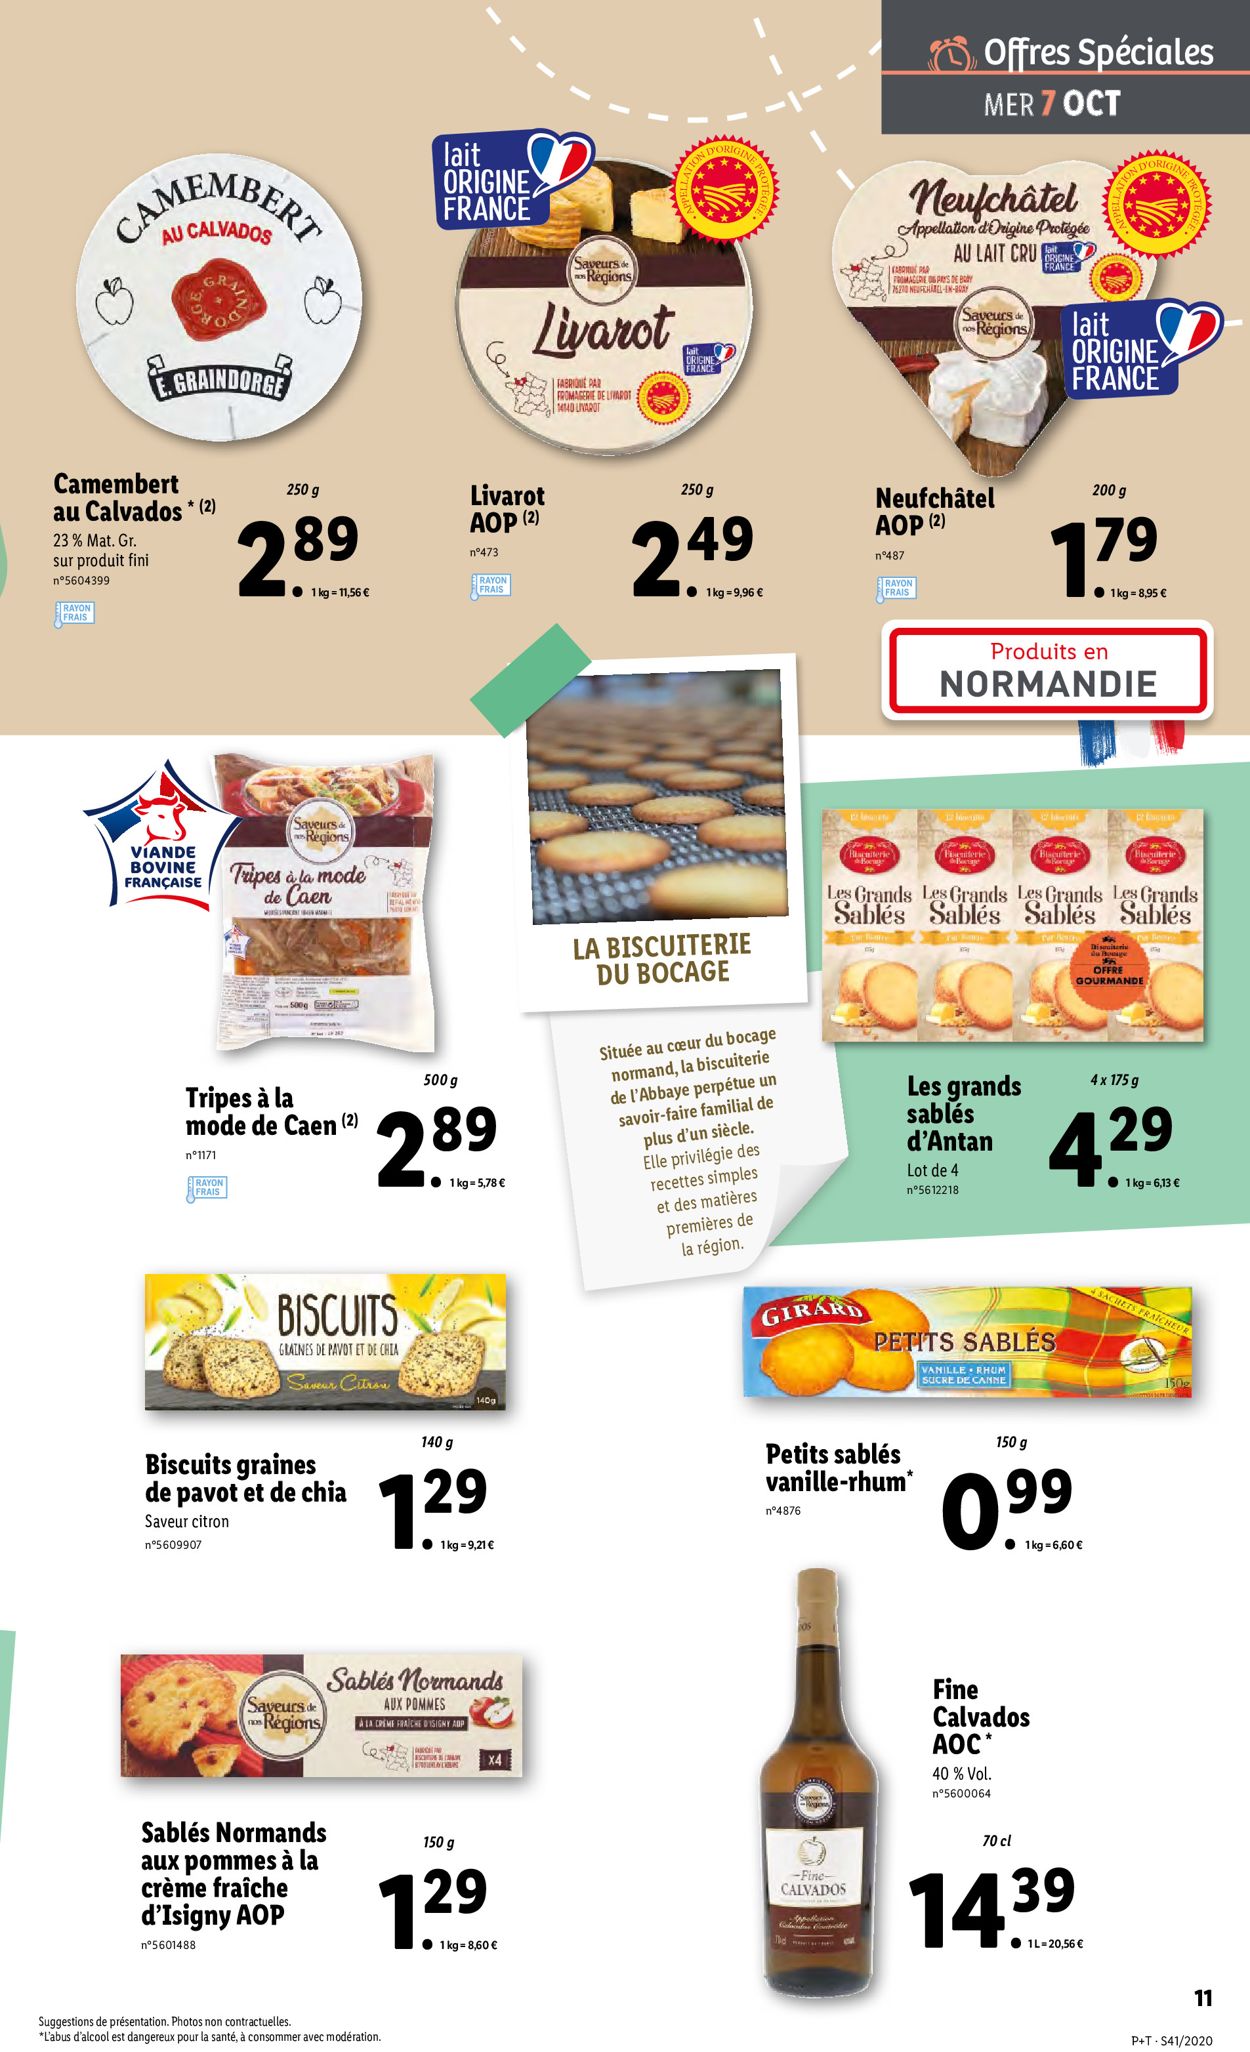 Lidl Catalogue - 07.10-13.10.2020 (Page 11)